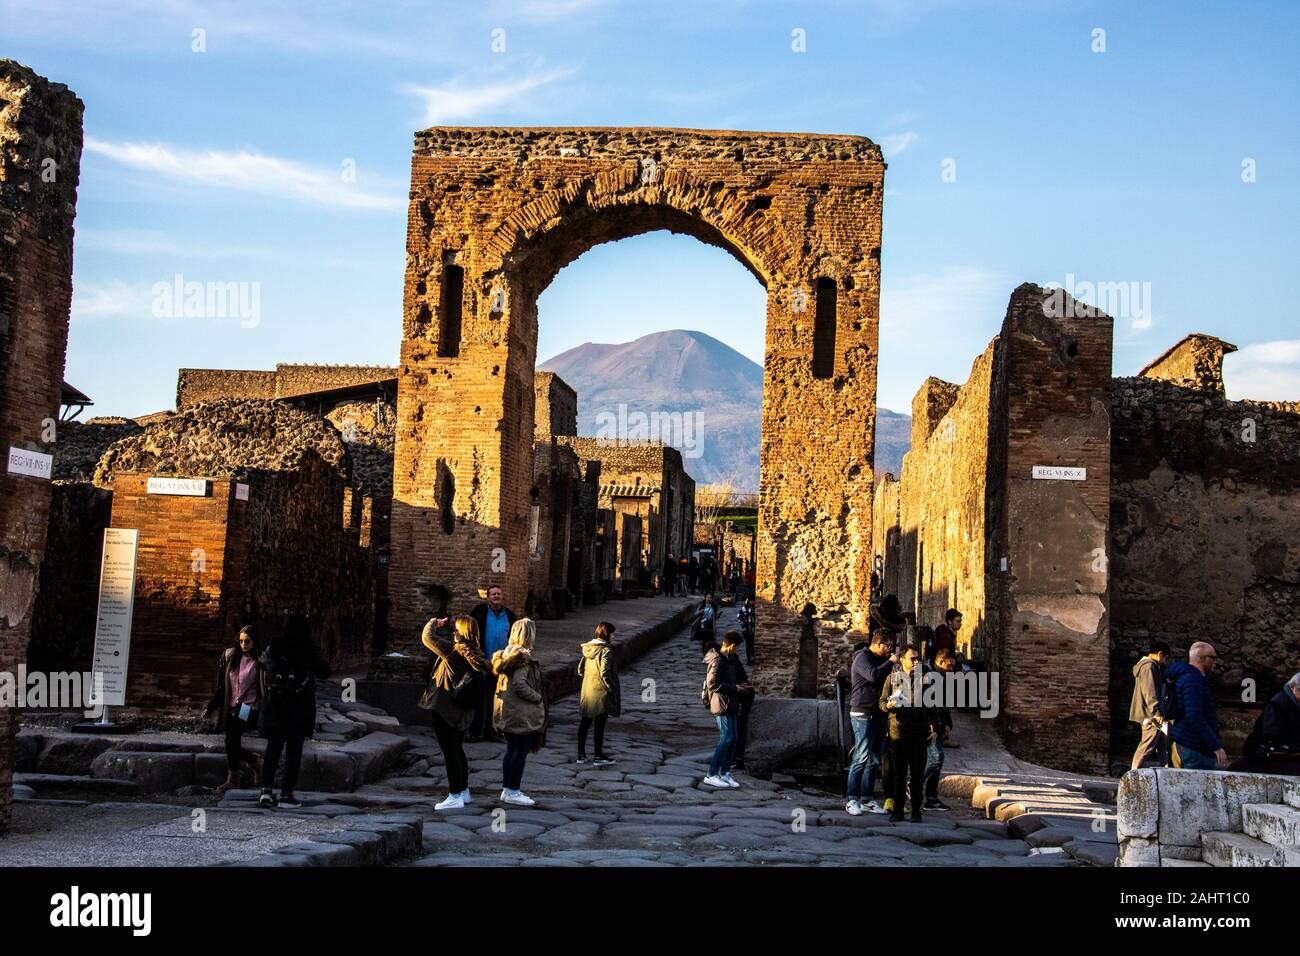 Tourists in front of an archway framing Mt Vesuvesius, Pompeii, Italy Stock Photo